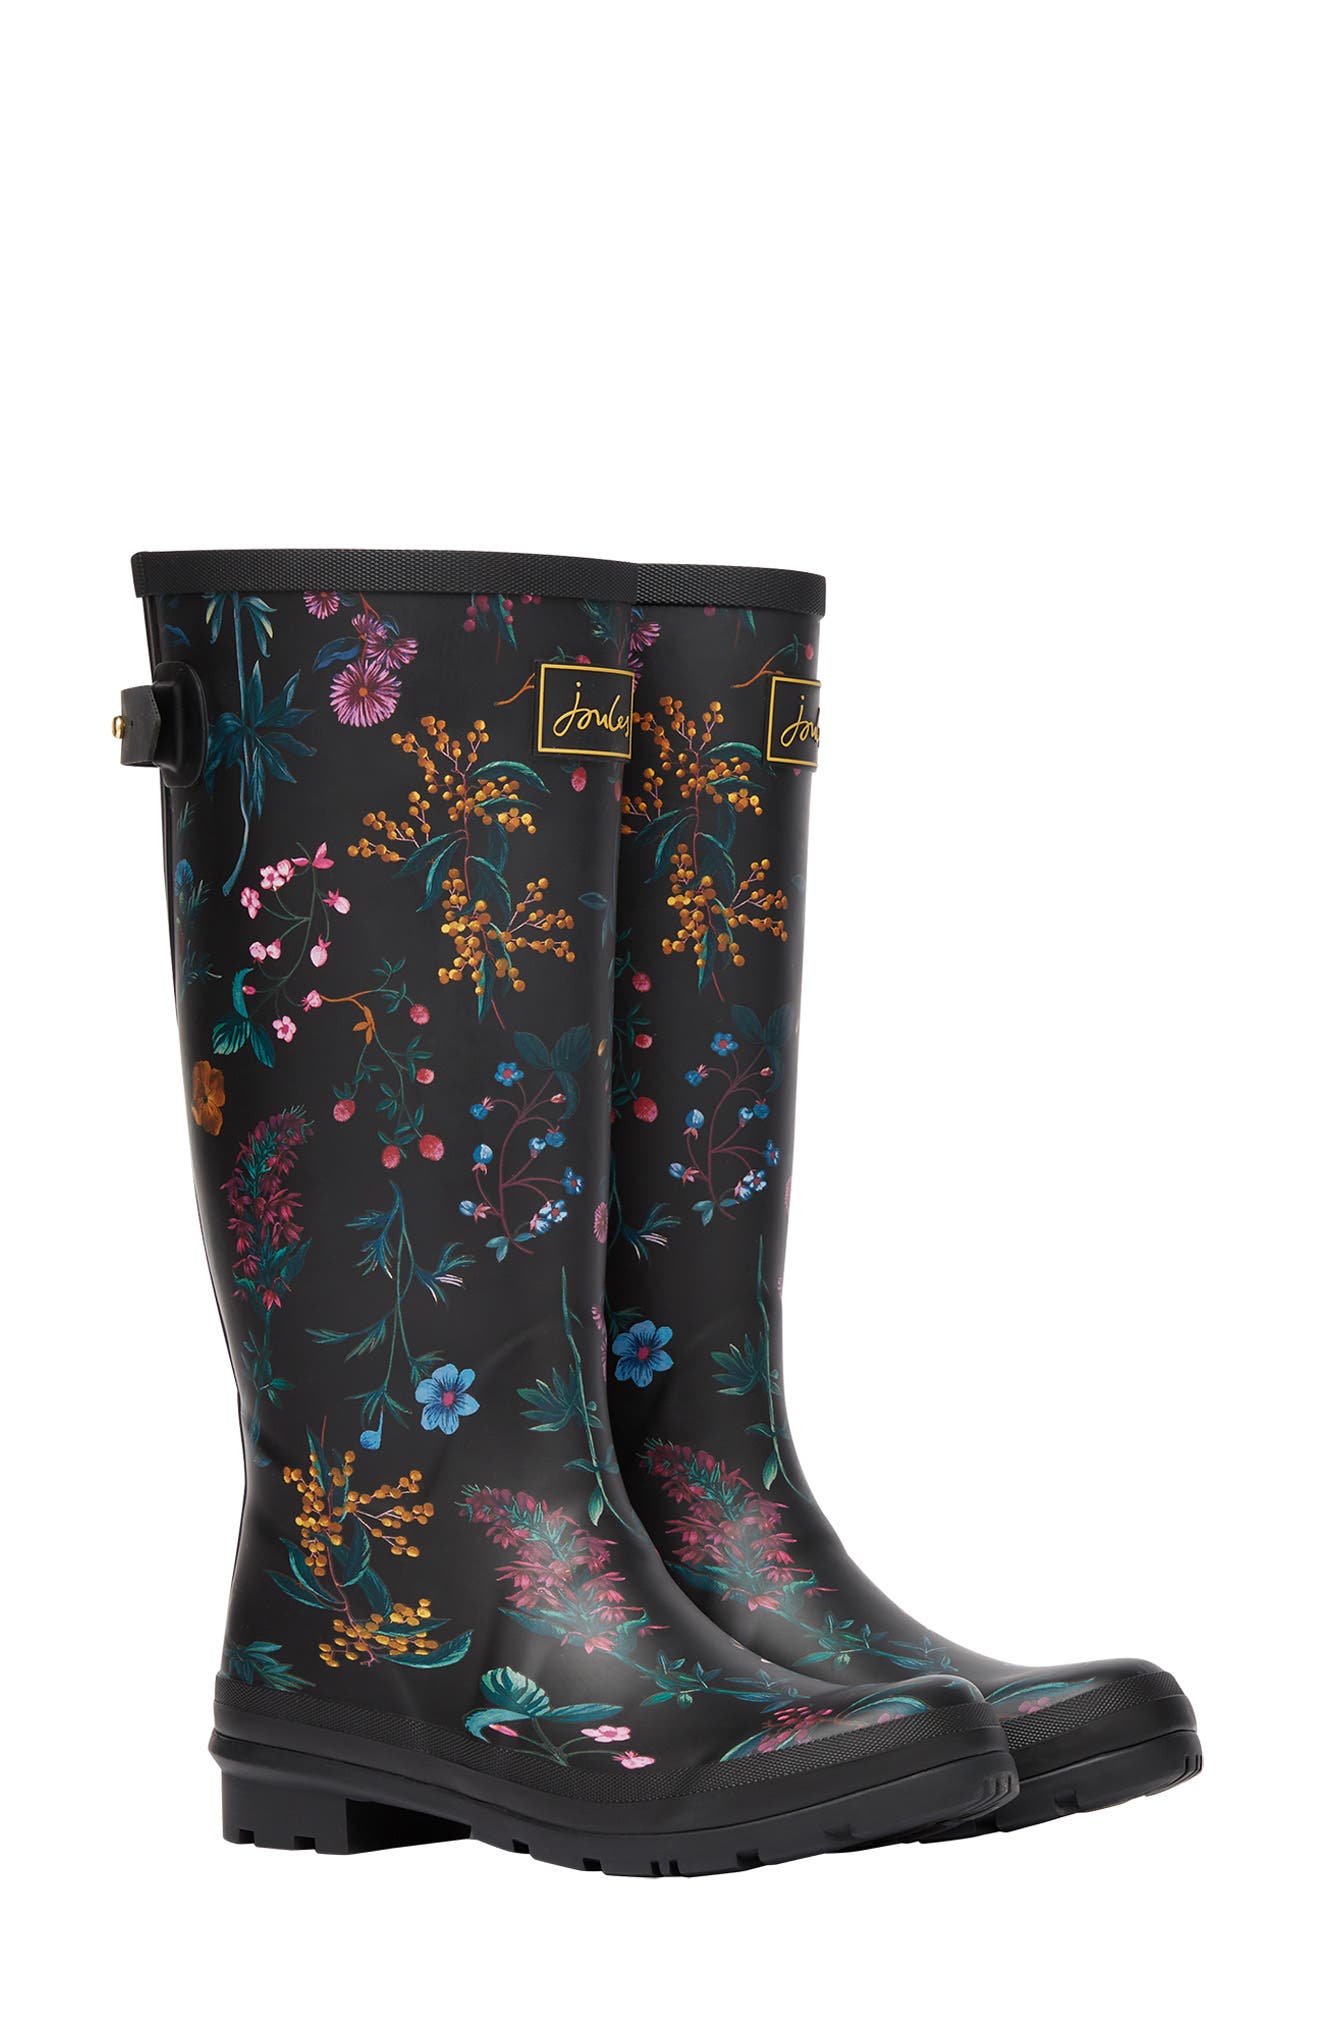 Joules Baby Girls Tall Printed Wellies White Stripe Floral 